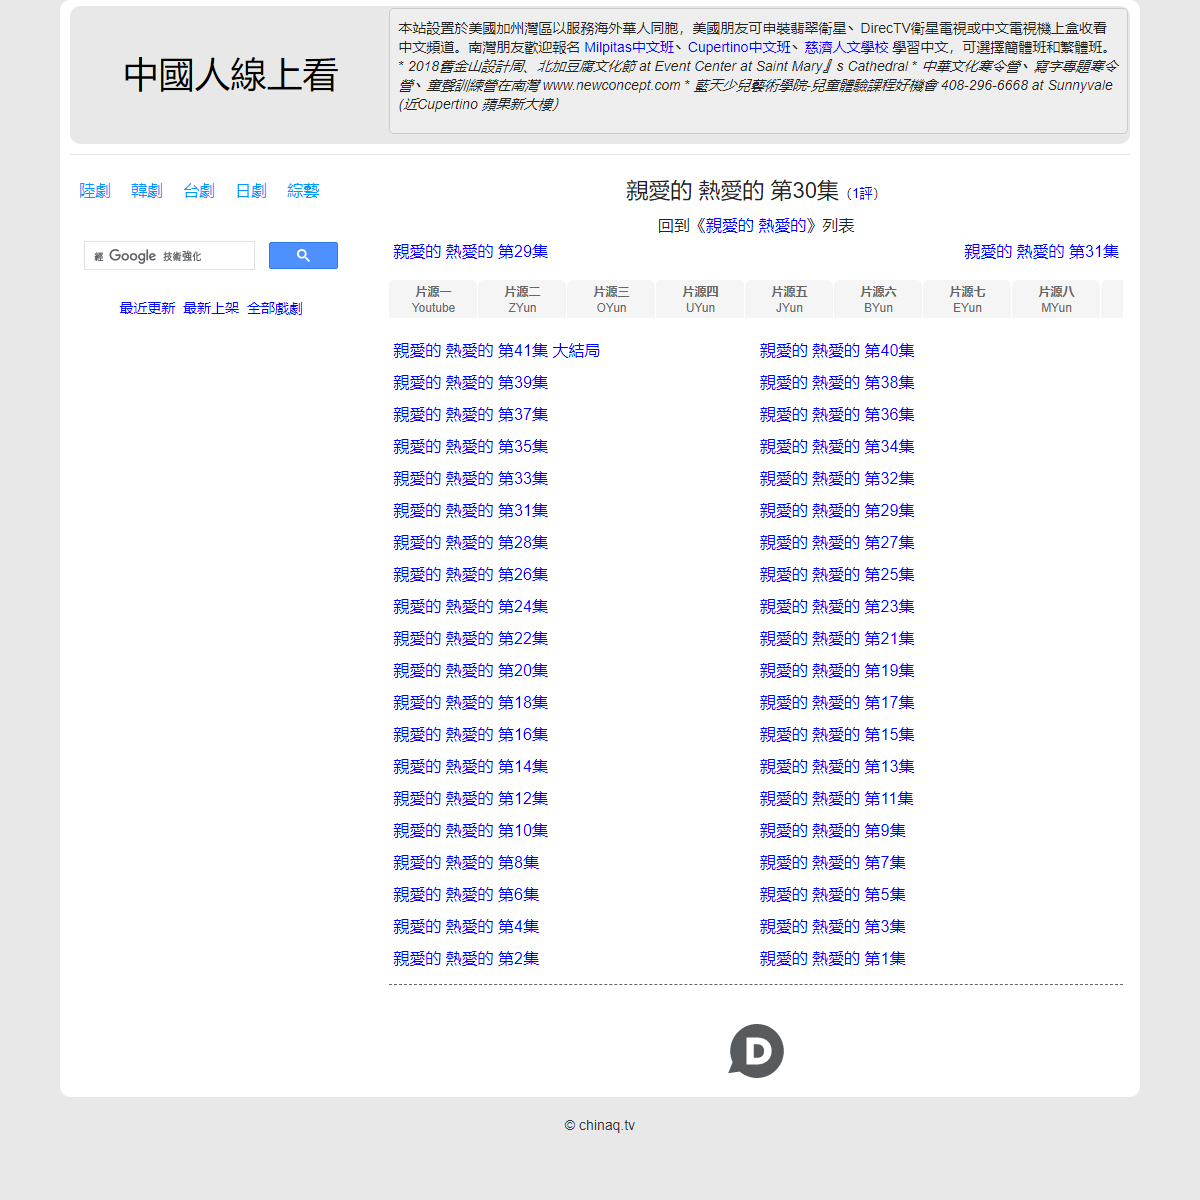 A complete backup of https://chinaq.tv/cn190709b/30.html